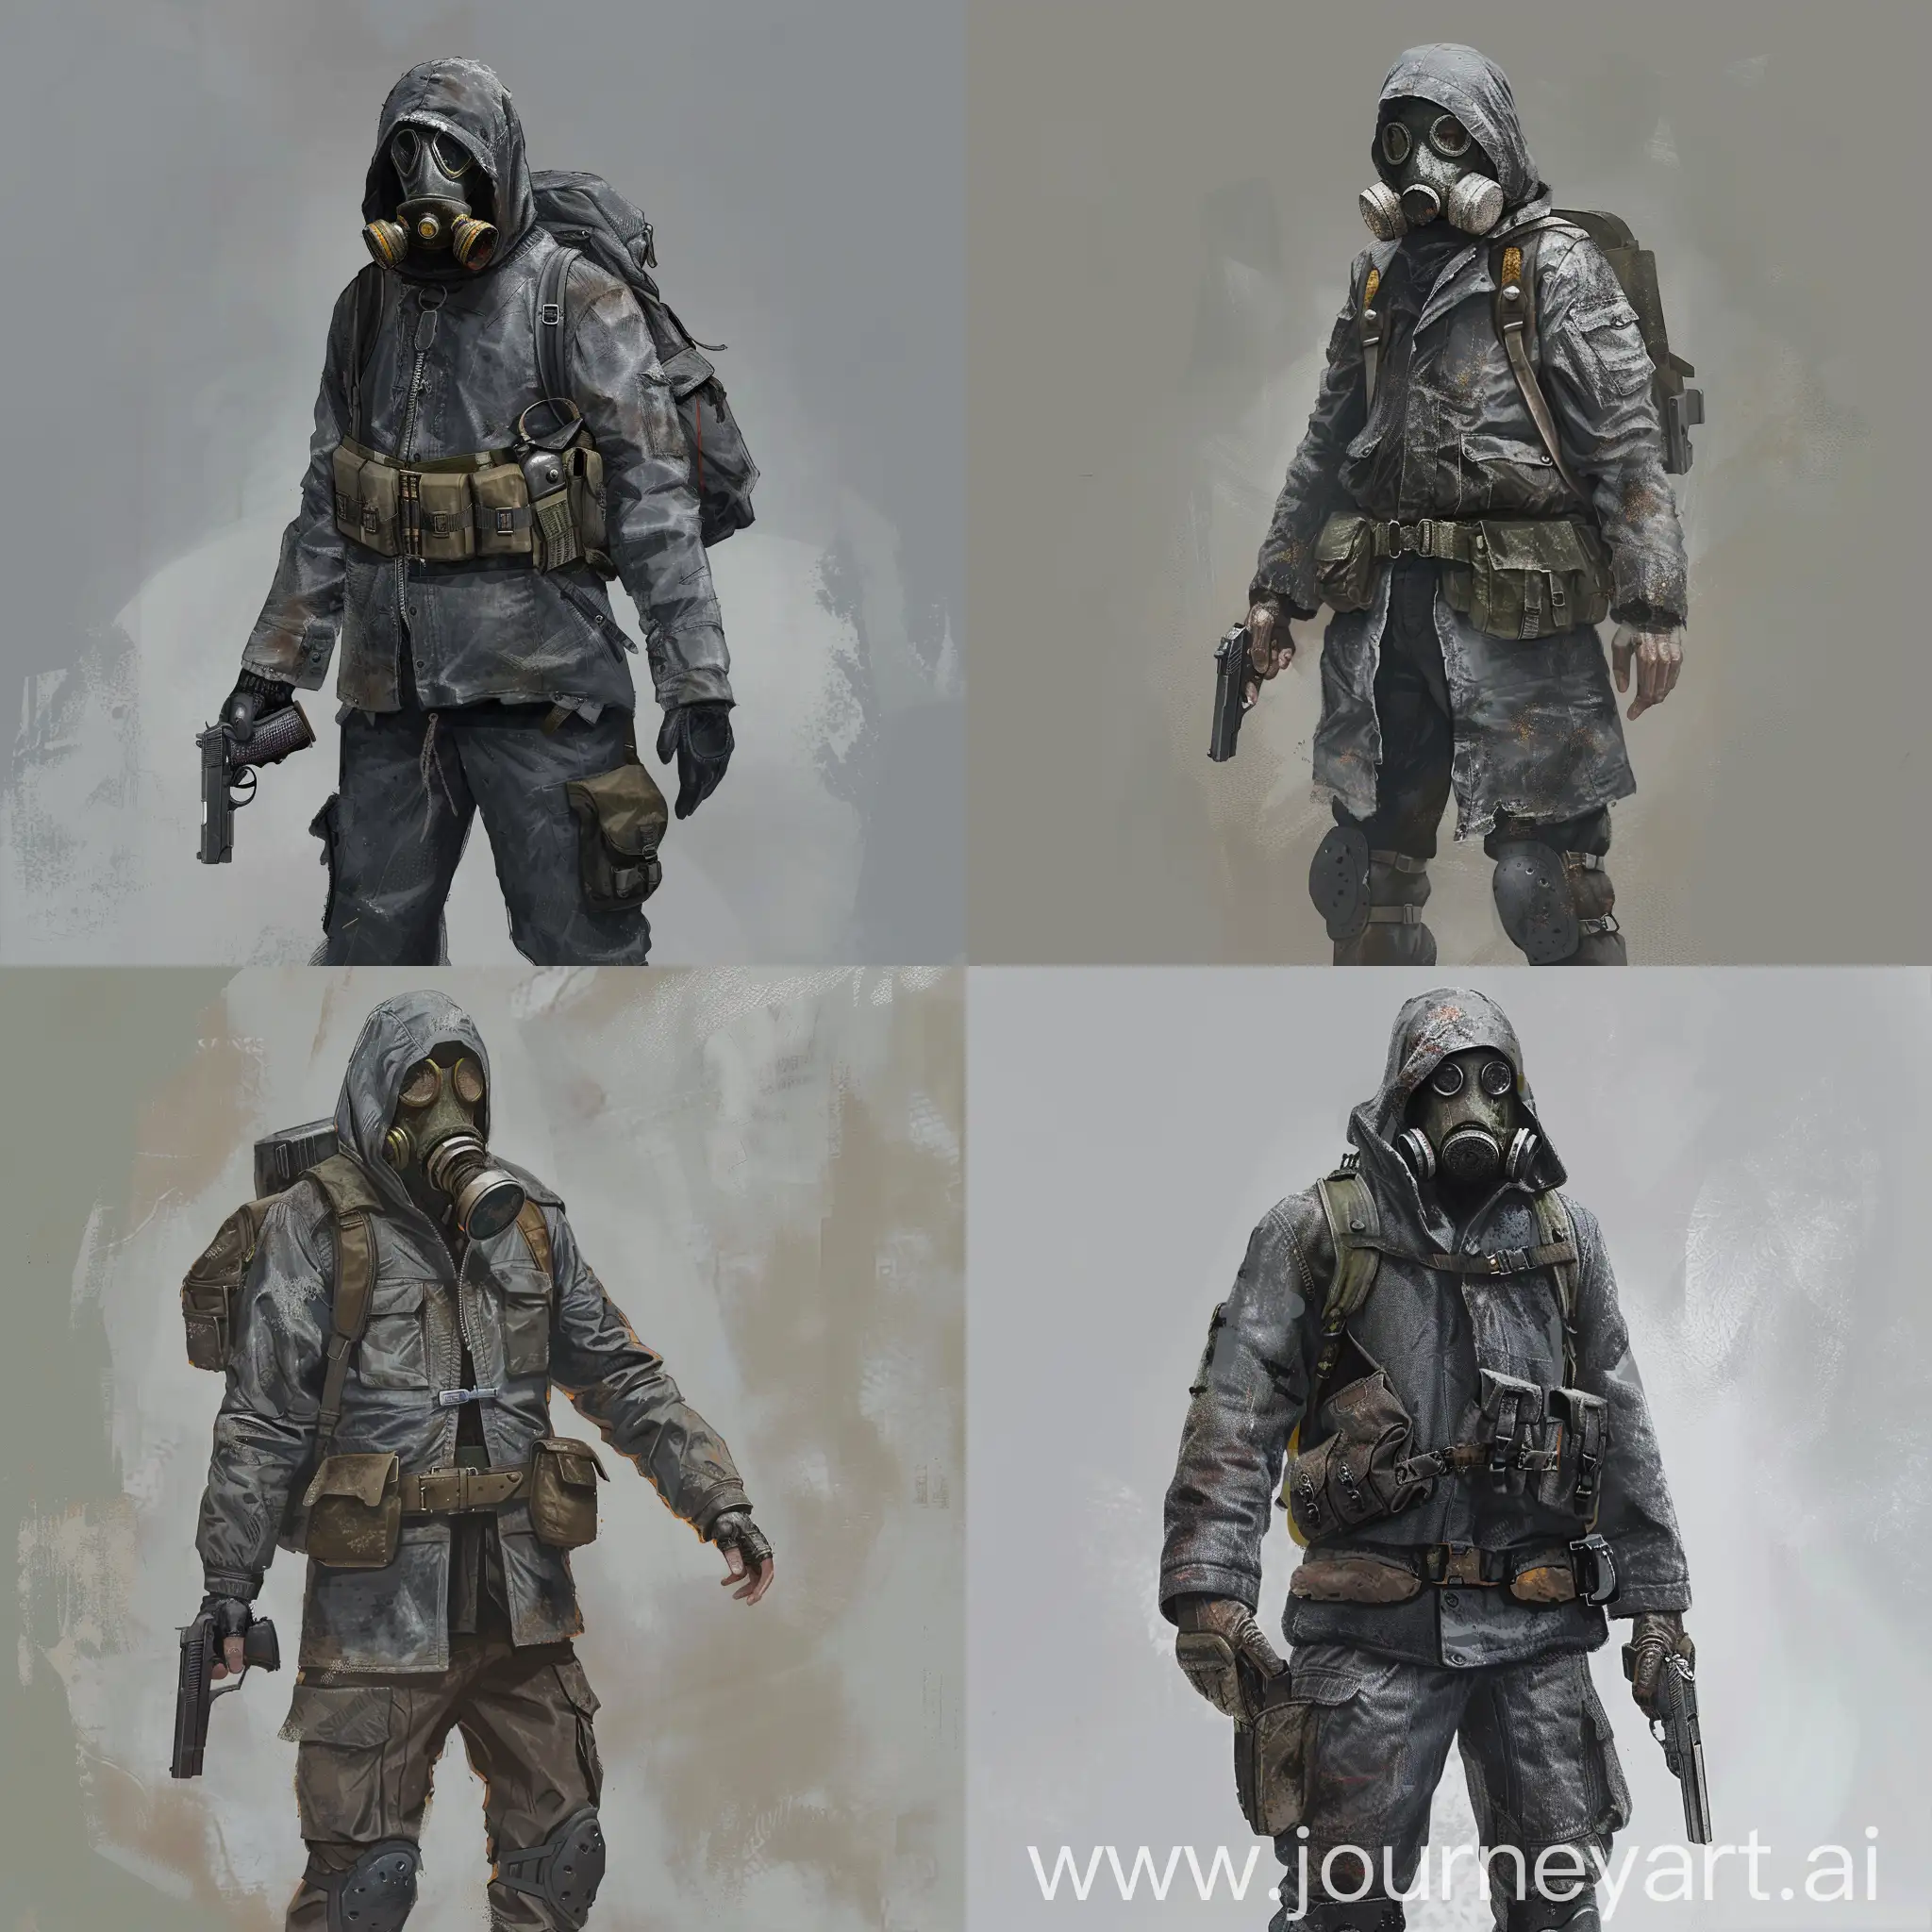 Stalker-Character-Concept-Art-Mysterious-Figure-with-Gas-Mask-and-Pistol